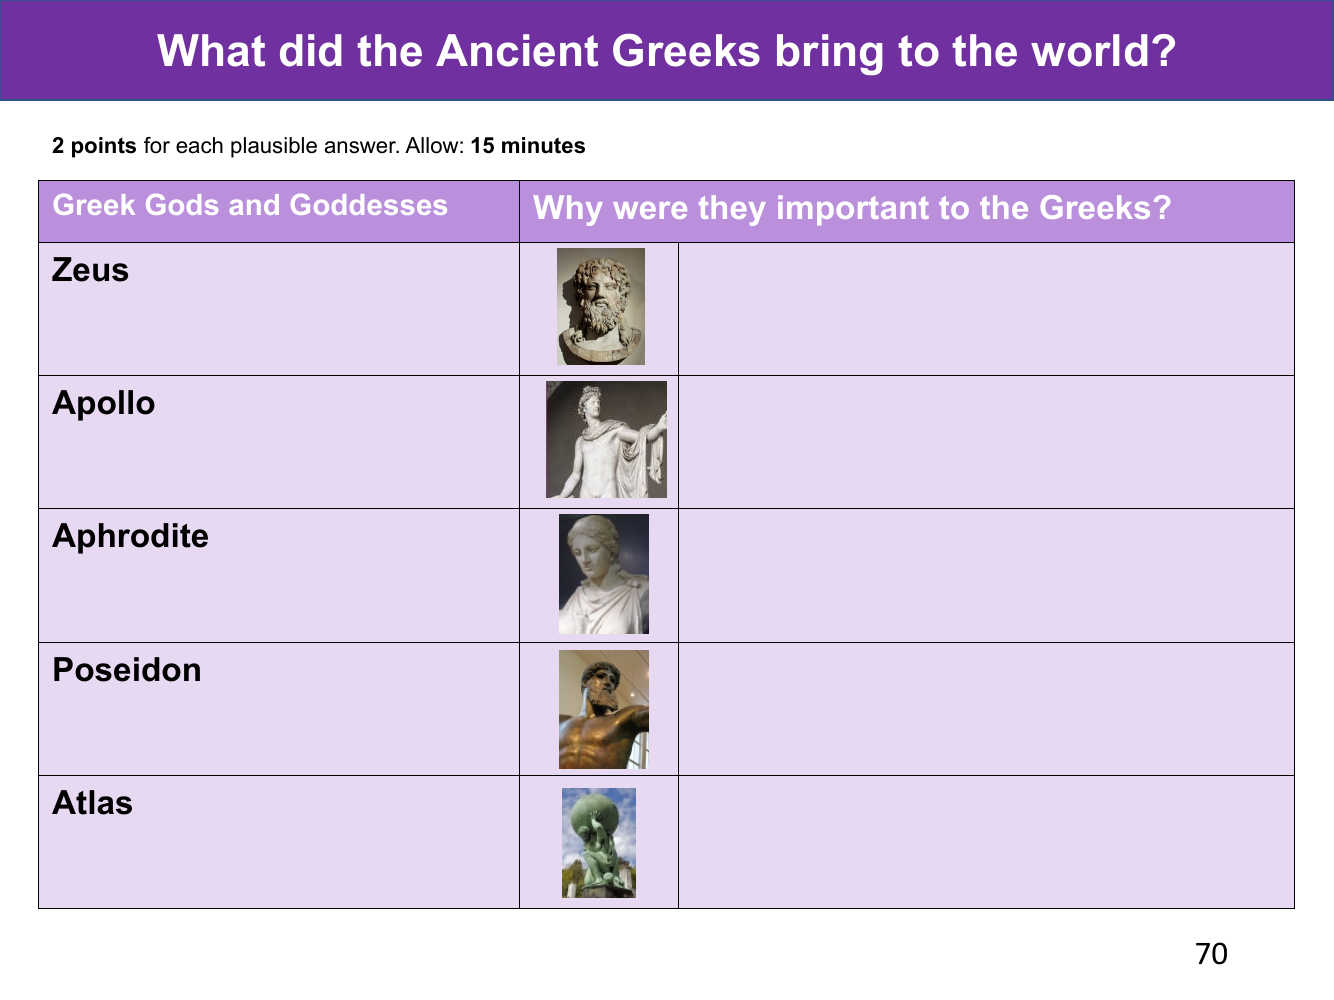 Why were the Gods important to the Ancient Greeks?